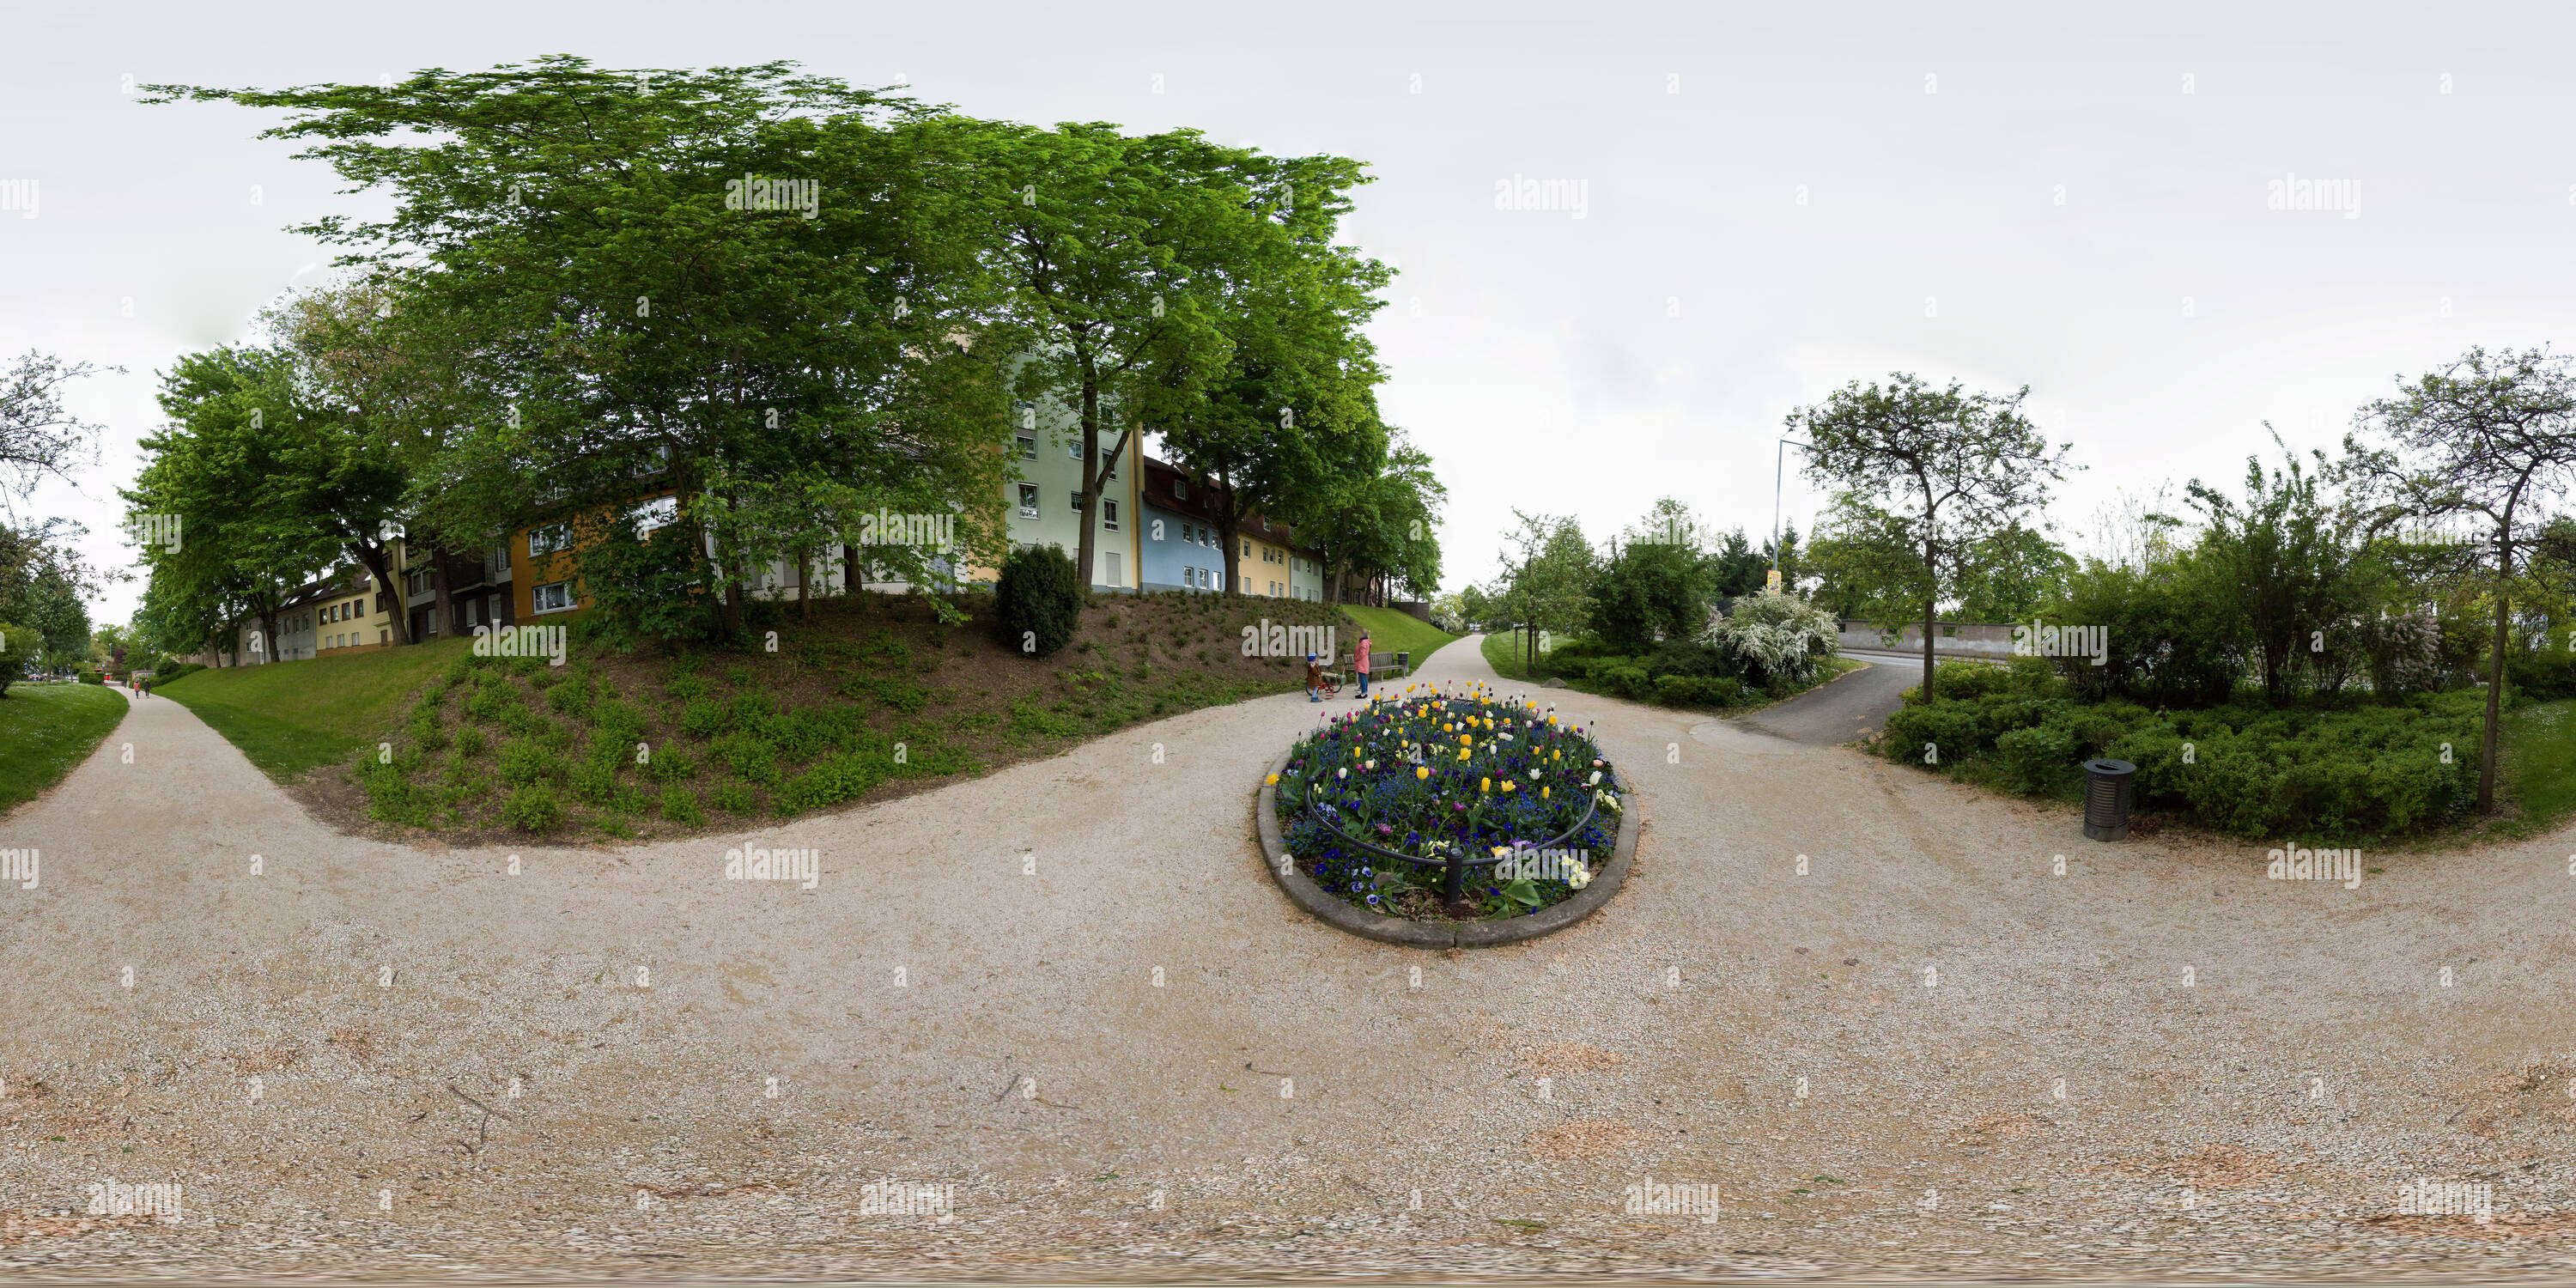 360 degree panoramic view of Green Willy-Brandt-Ring, Row of Houses Luginsland, Worms, 2017-05, freehand